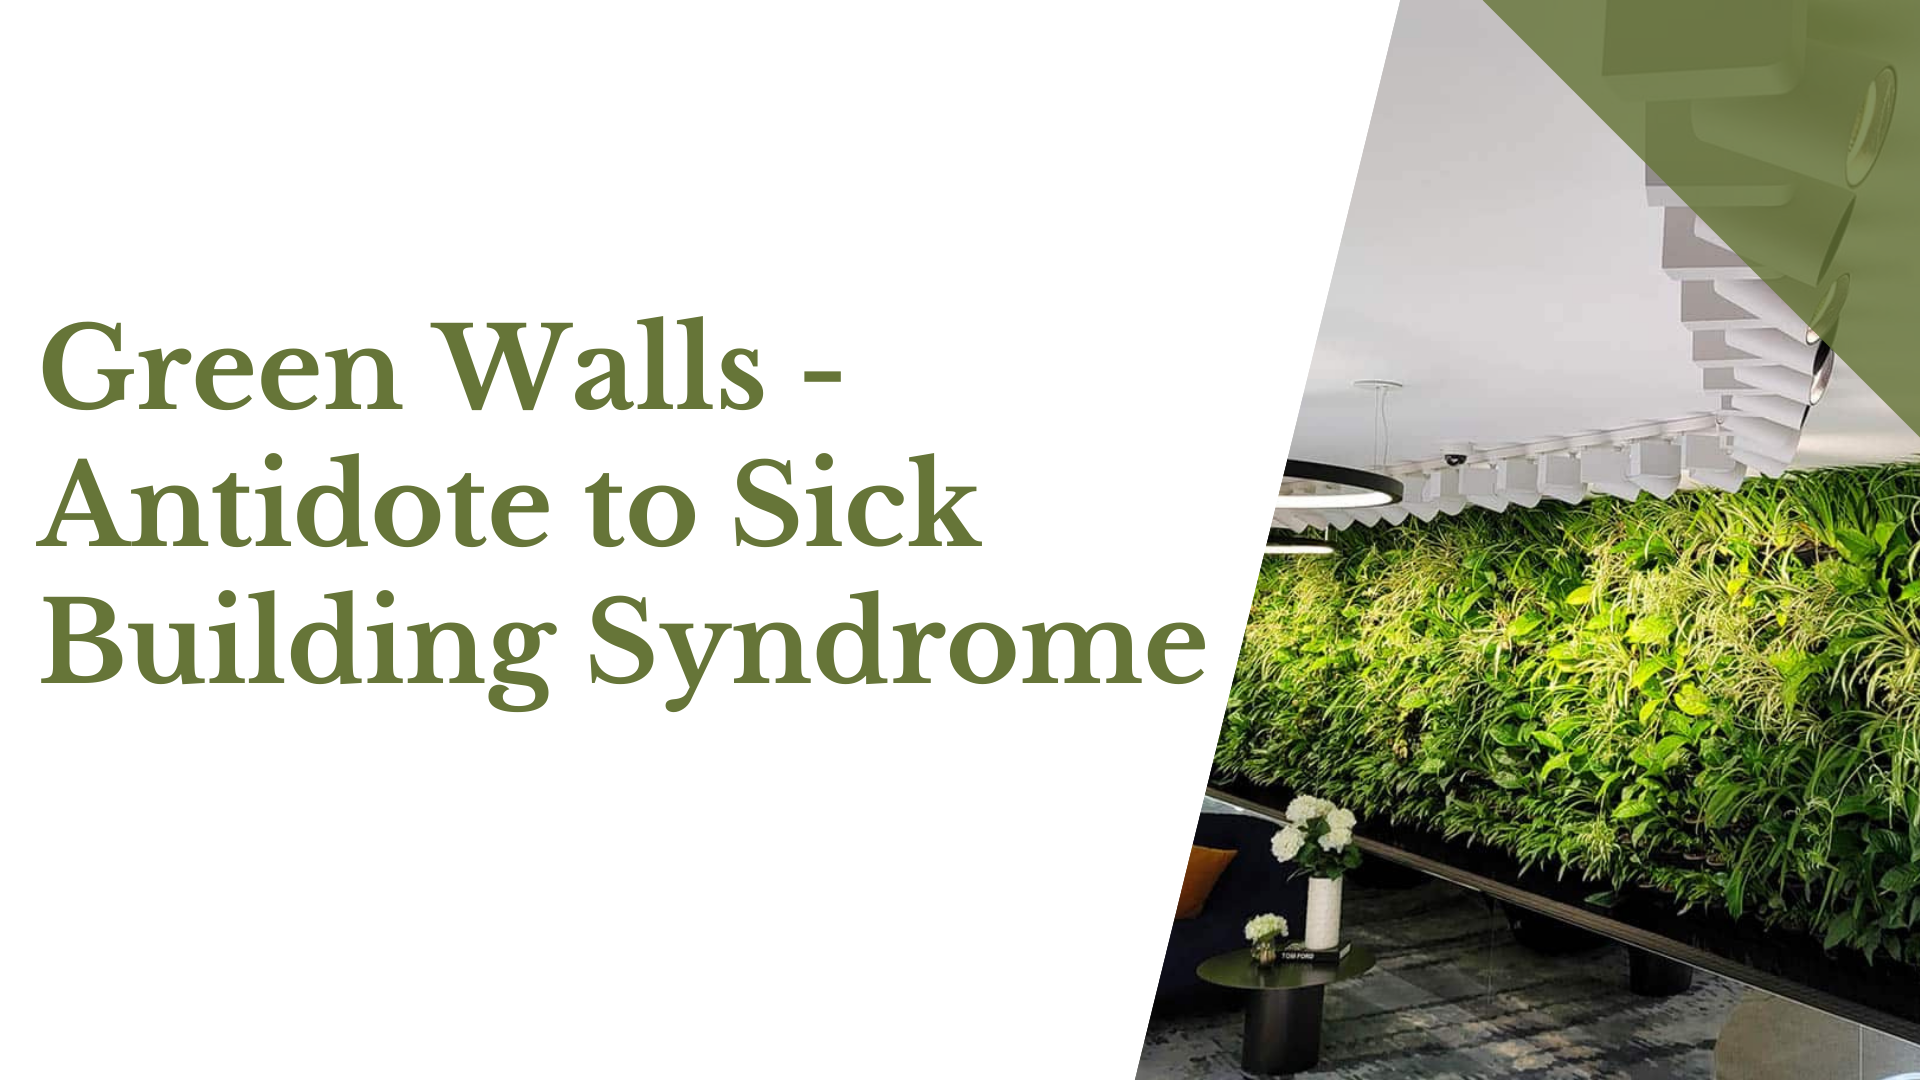 Green Walls - Antidote to Sick Building Syndrome green walls